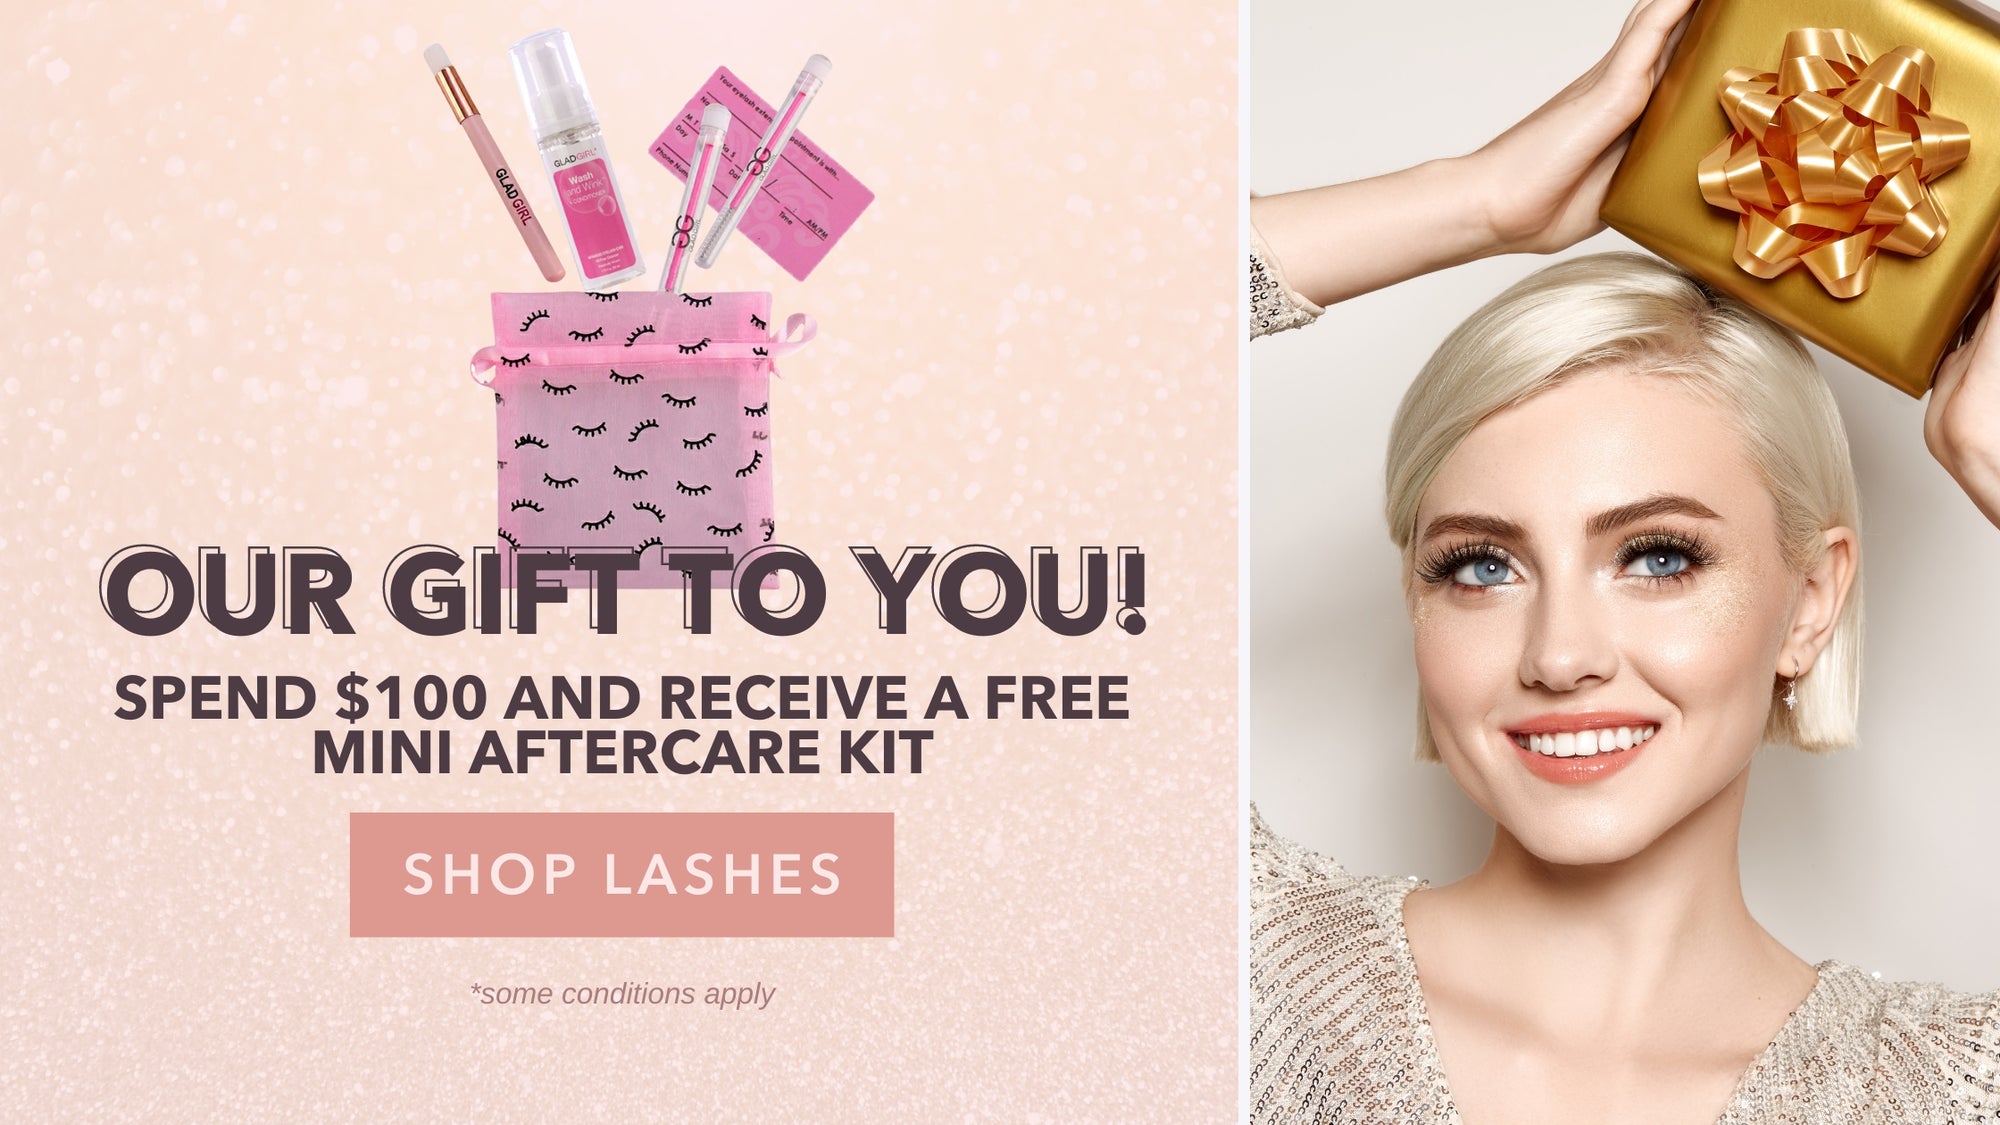 Get a Free Mini After Care Kit! Spend $100+ with GladGirl Your Leader in Eyelash Extension Supplies and More this Holiday Season